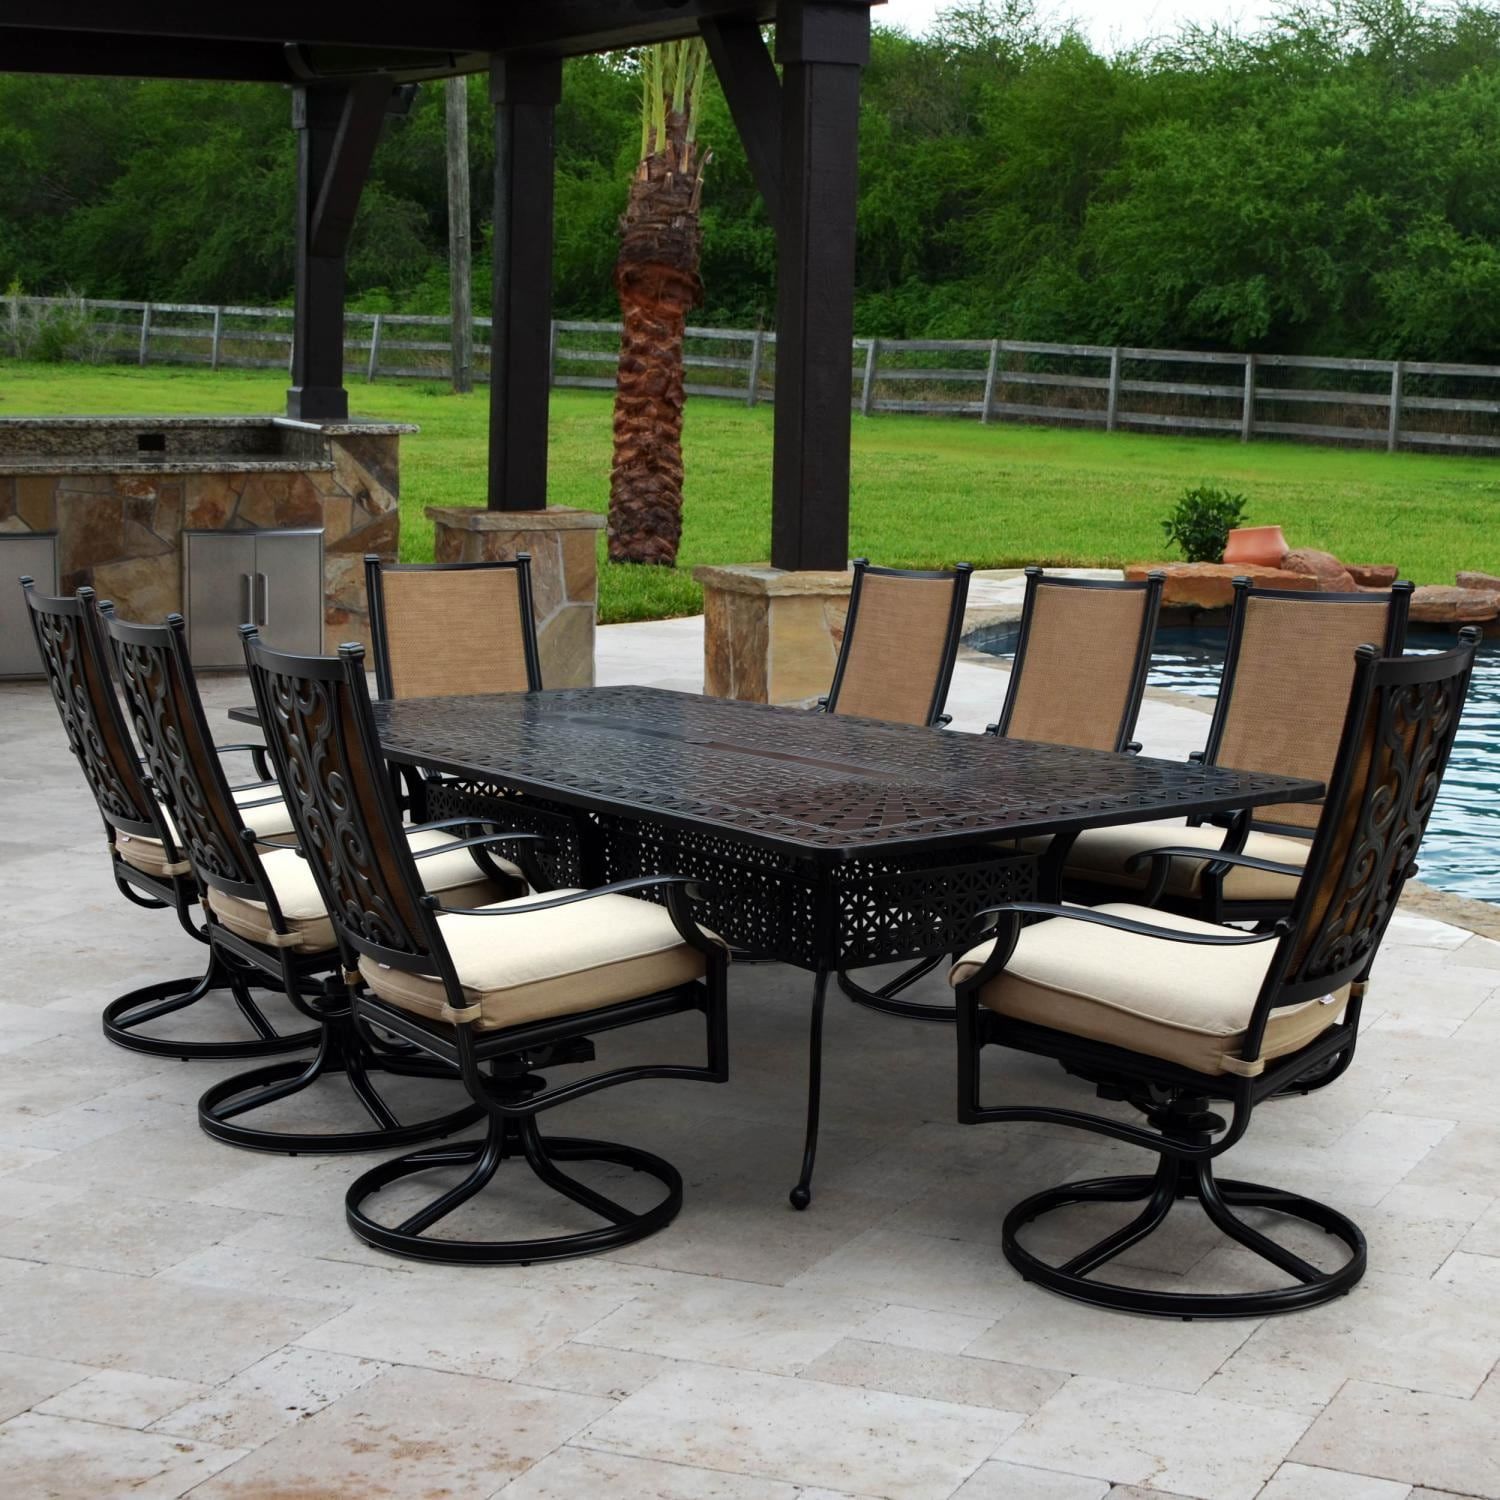 Bocage 9 Piece Cast Aluminum Sling Patio Dining Set W/ 102 Inch In 9 Piece Extendable Patio Dining Sets (View 14 of 15)